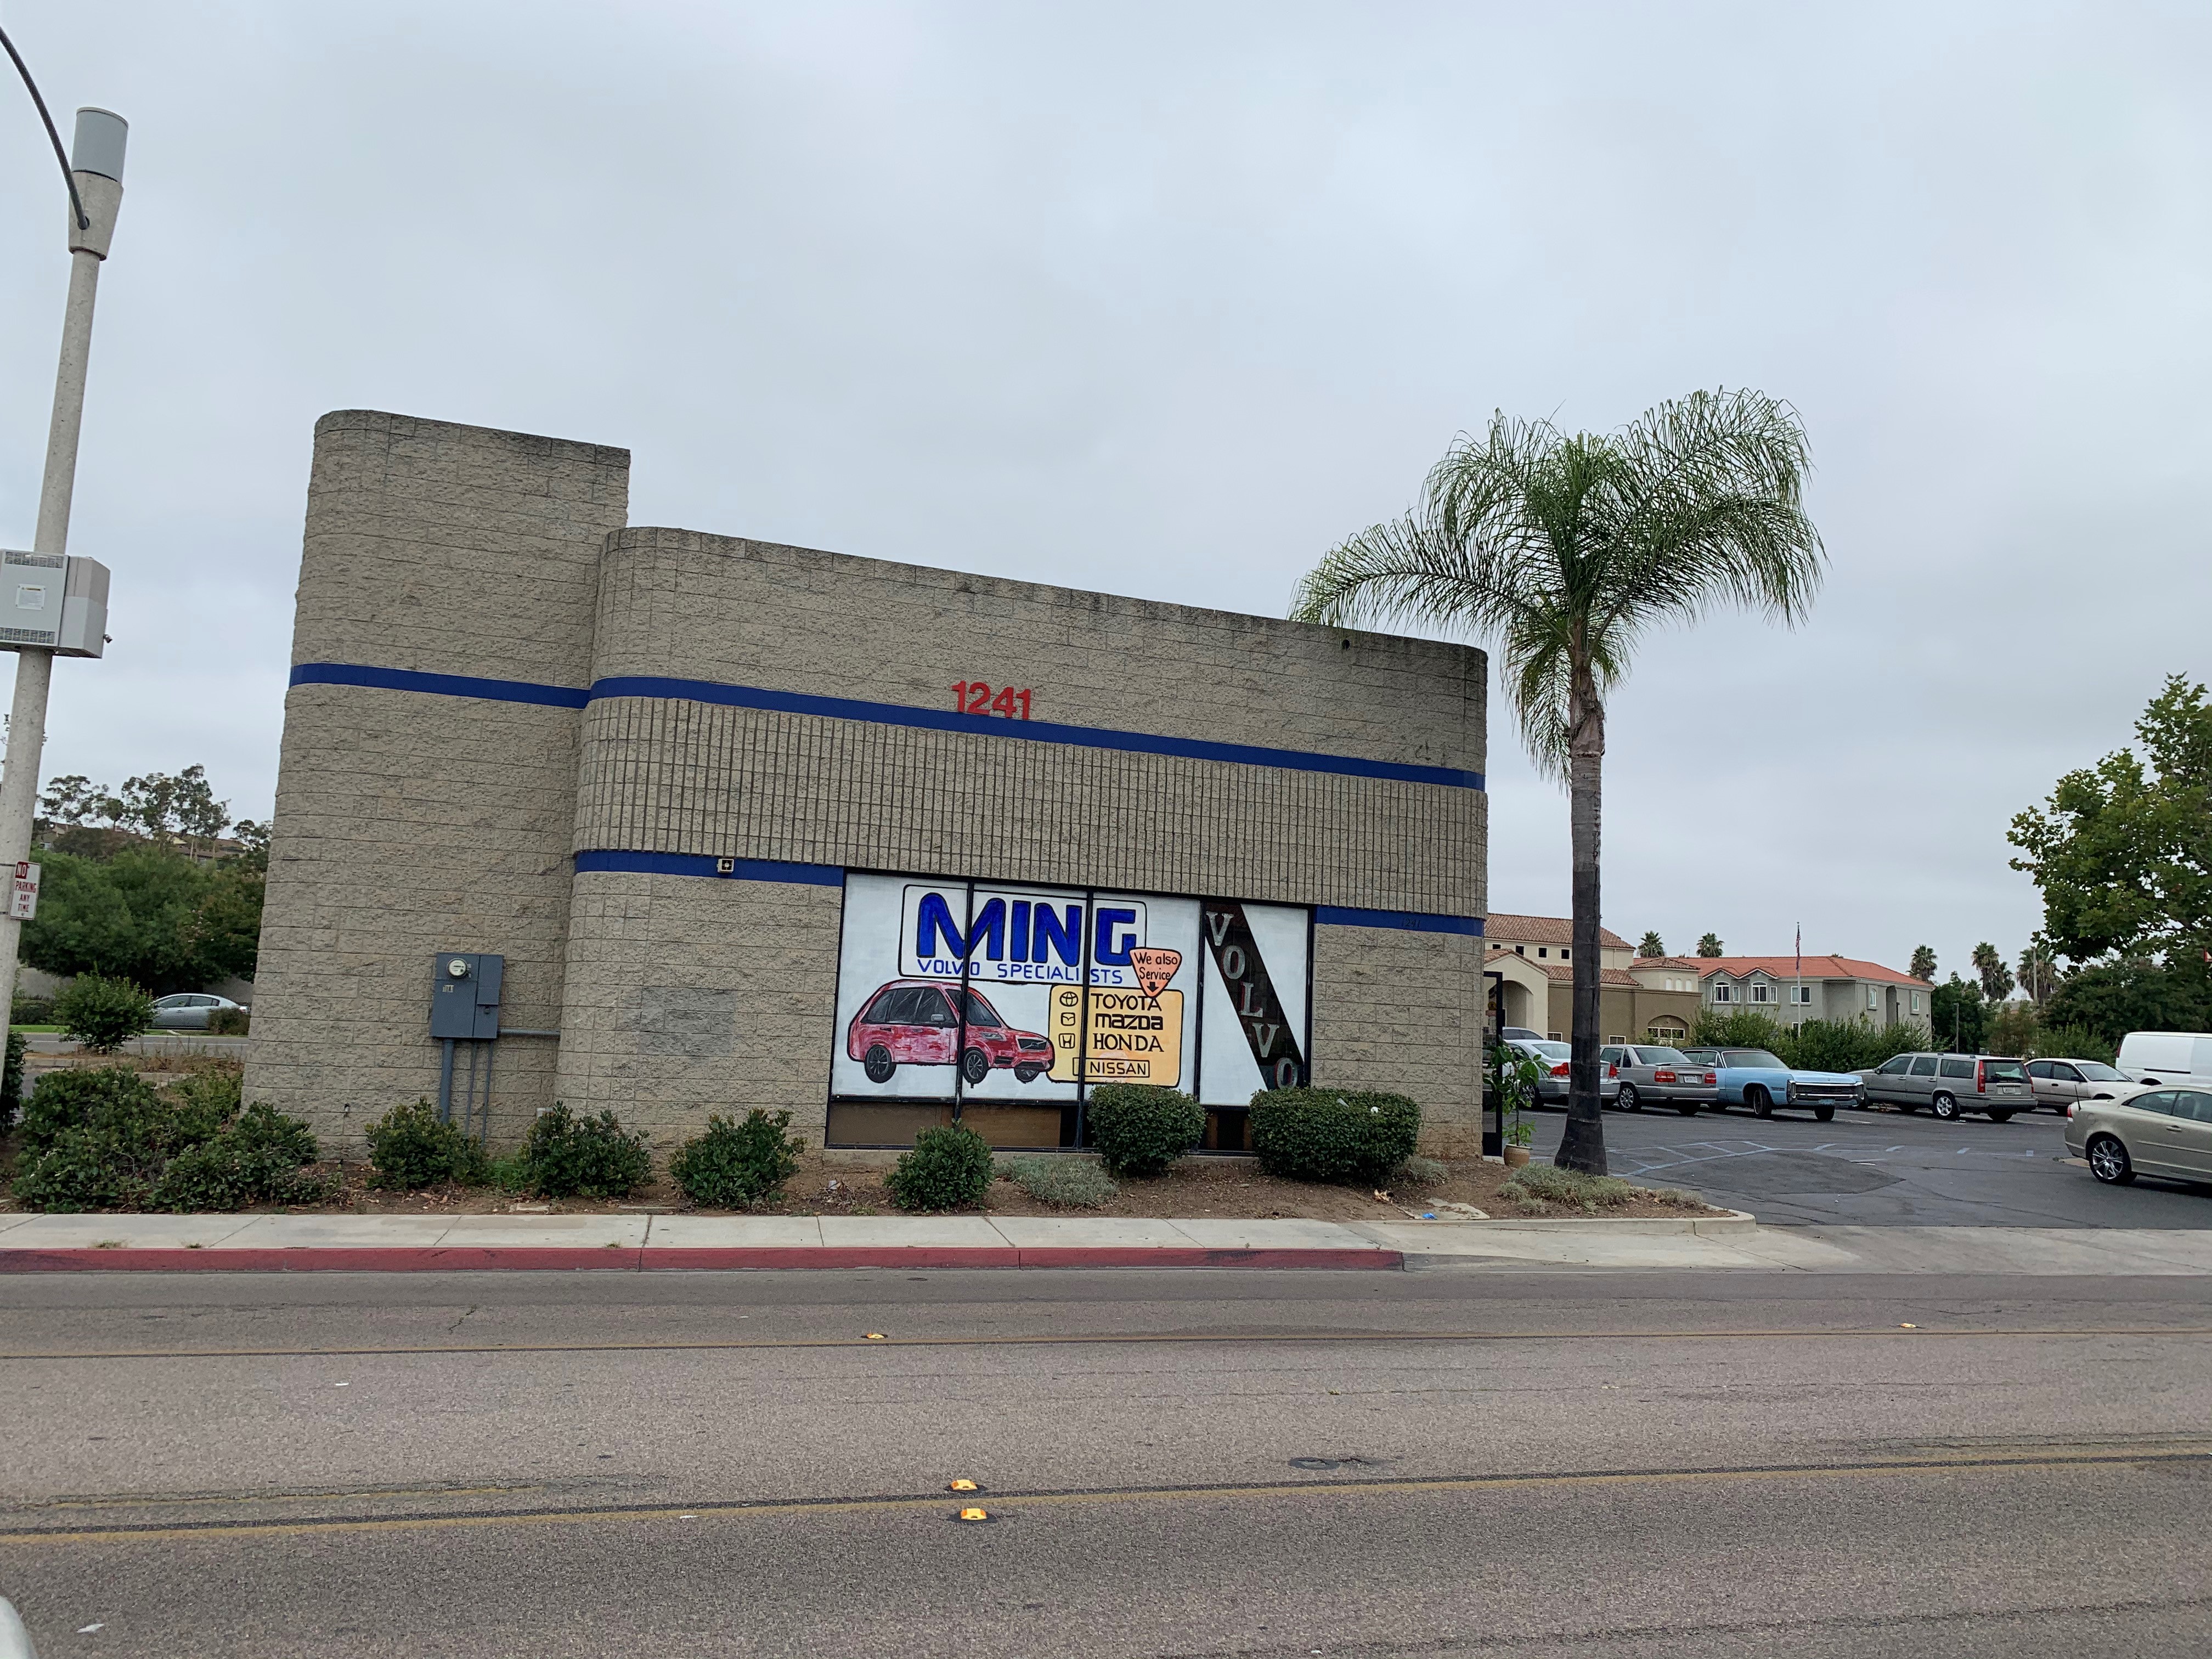 For over 25 years, we have been the top local auto repair shop in Escondido specializing in Volvo re Ming Volvo Specialists Escondido (760)735-3207